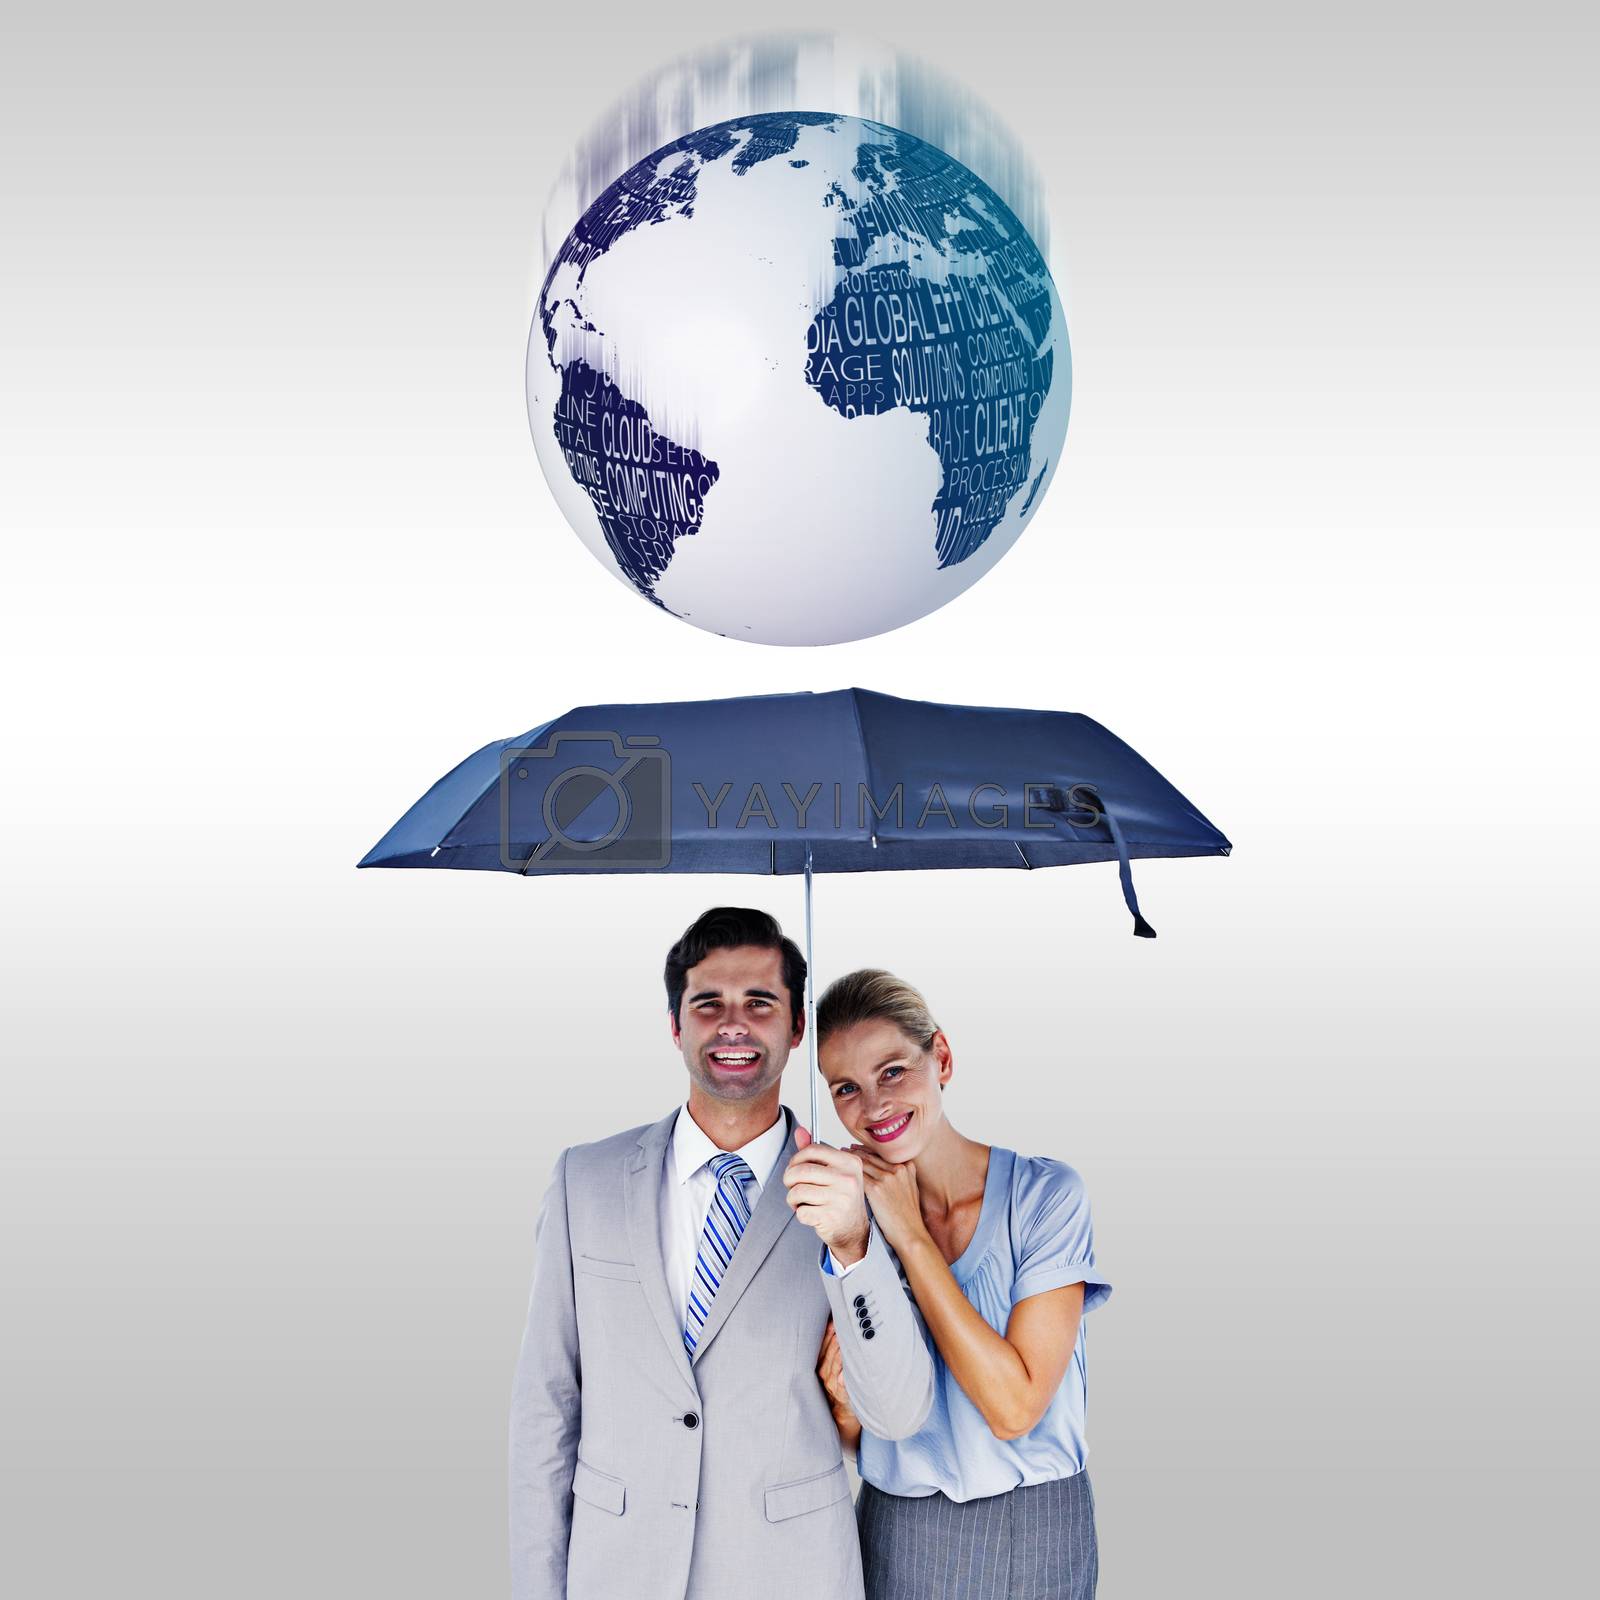 Royalty free image of Composite image of business people holding a black umbrella by Wavebreakmedia